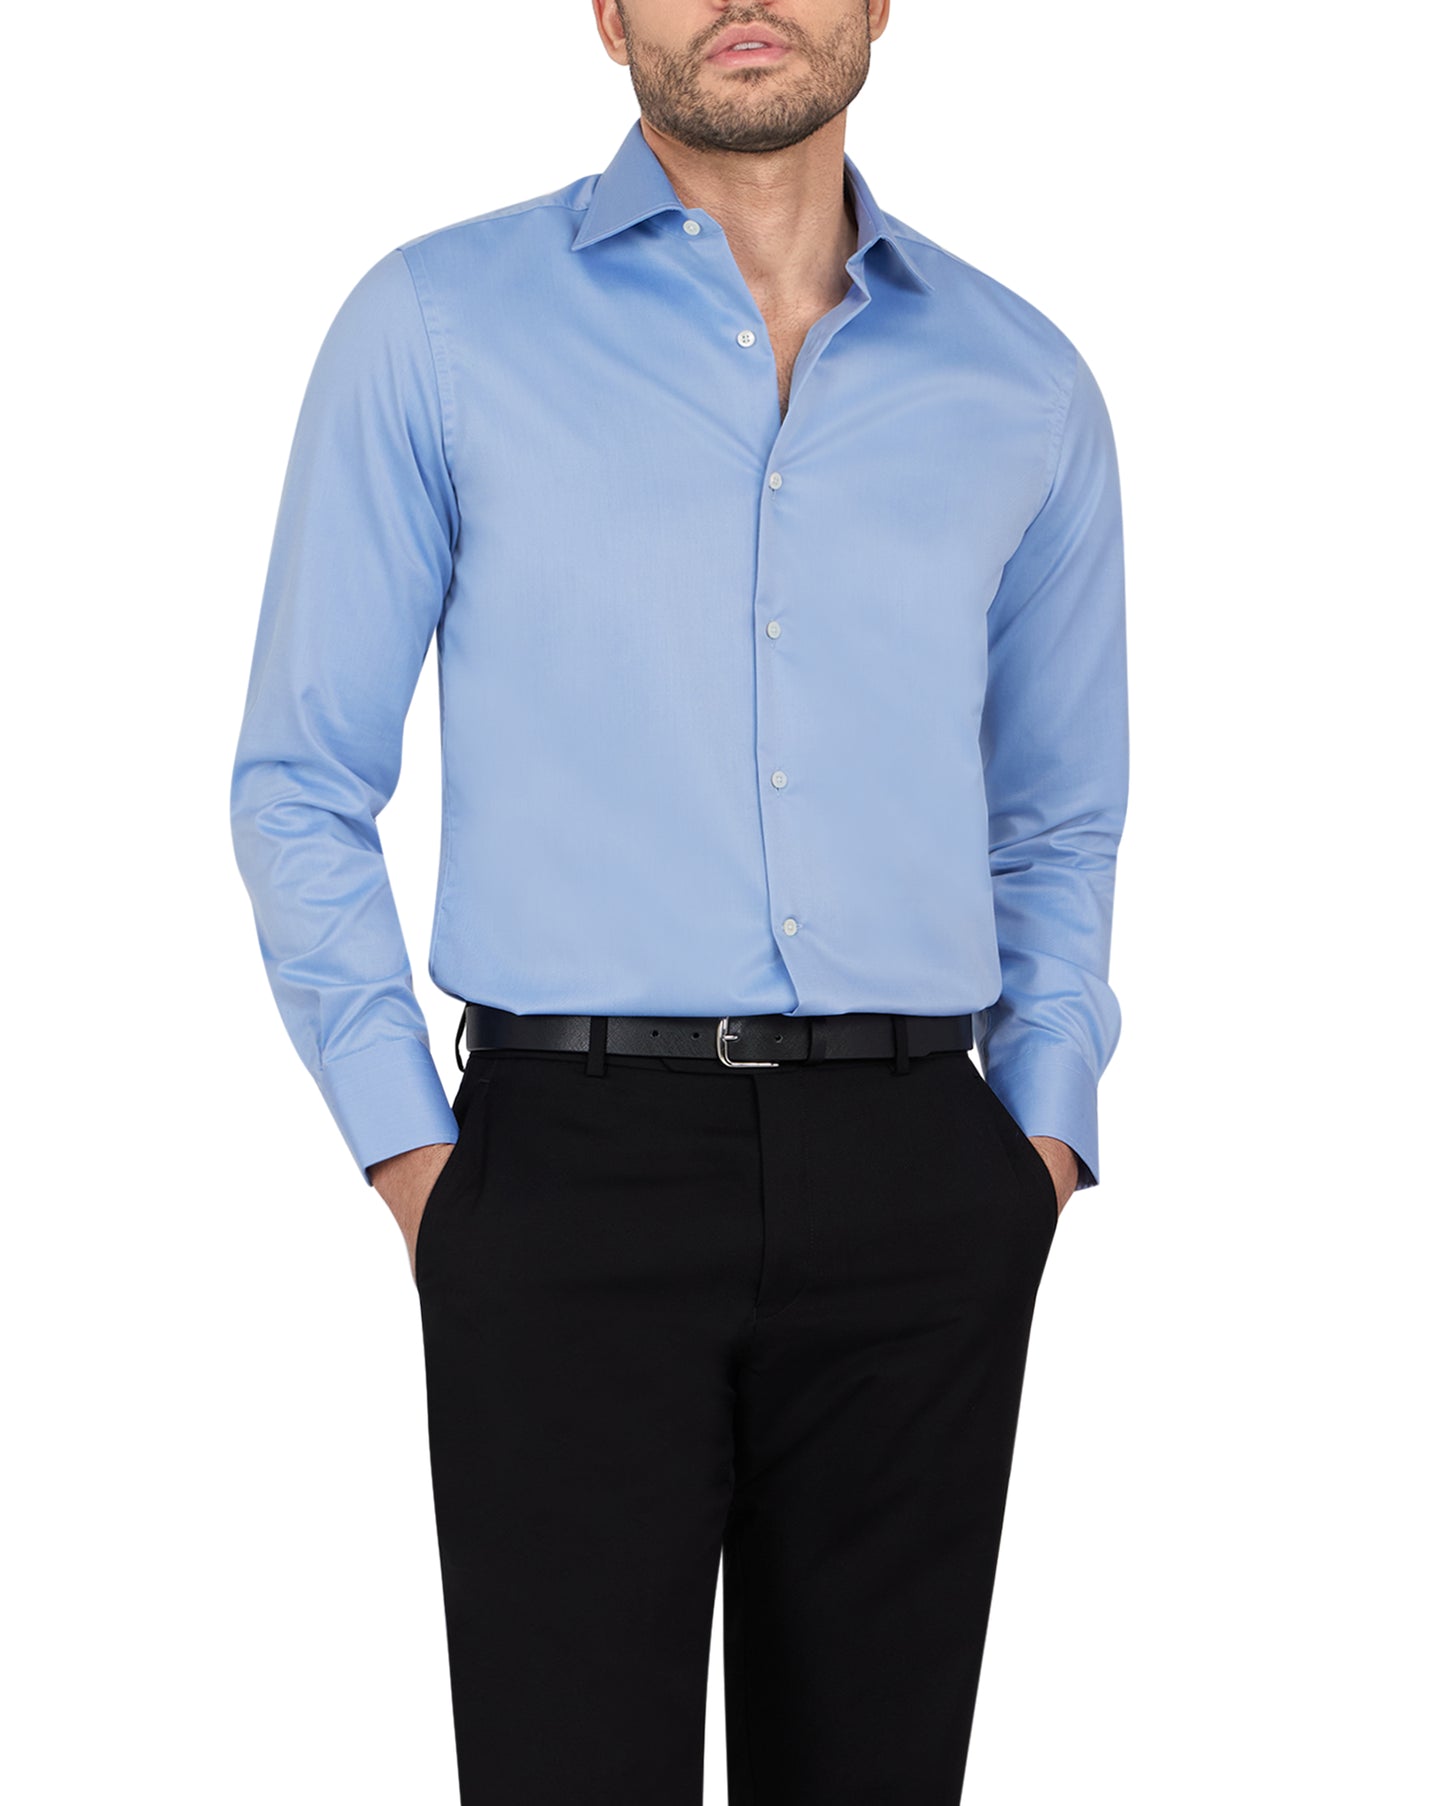 French Blue Twill Natural Stretch Cotton Dress Shirt